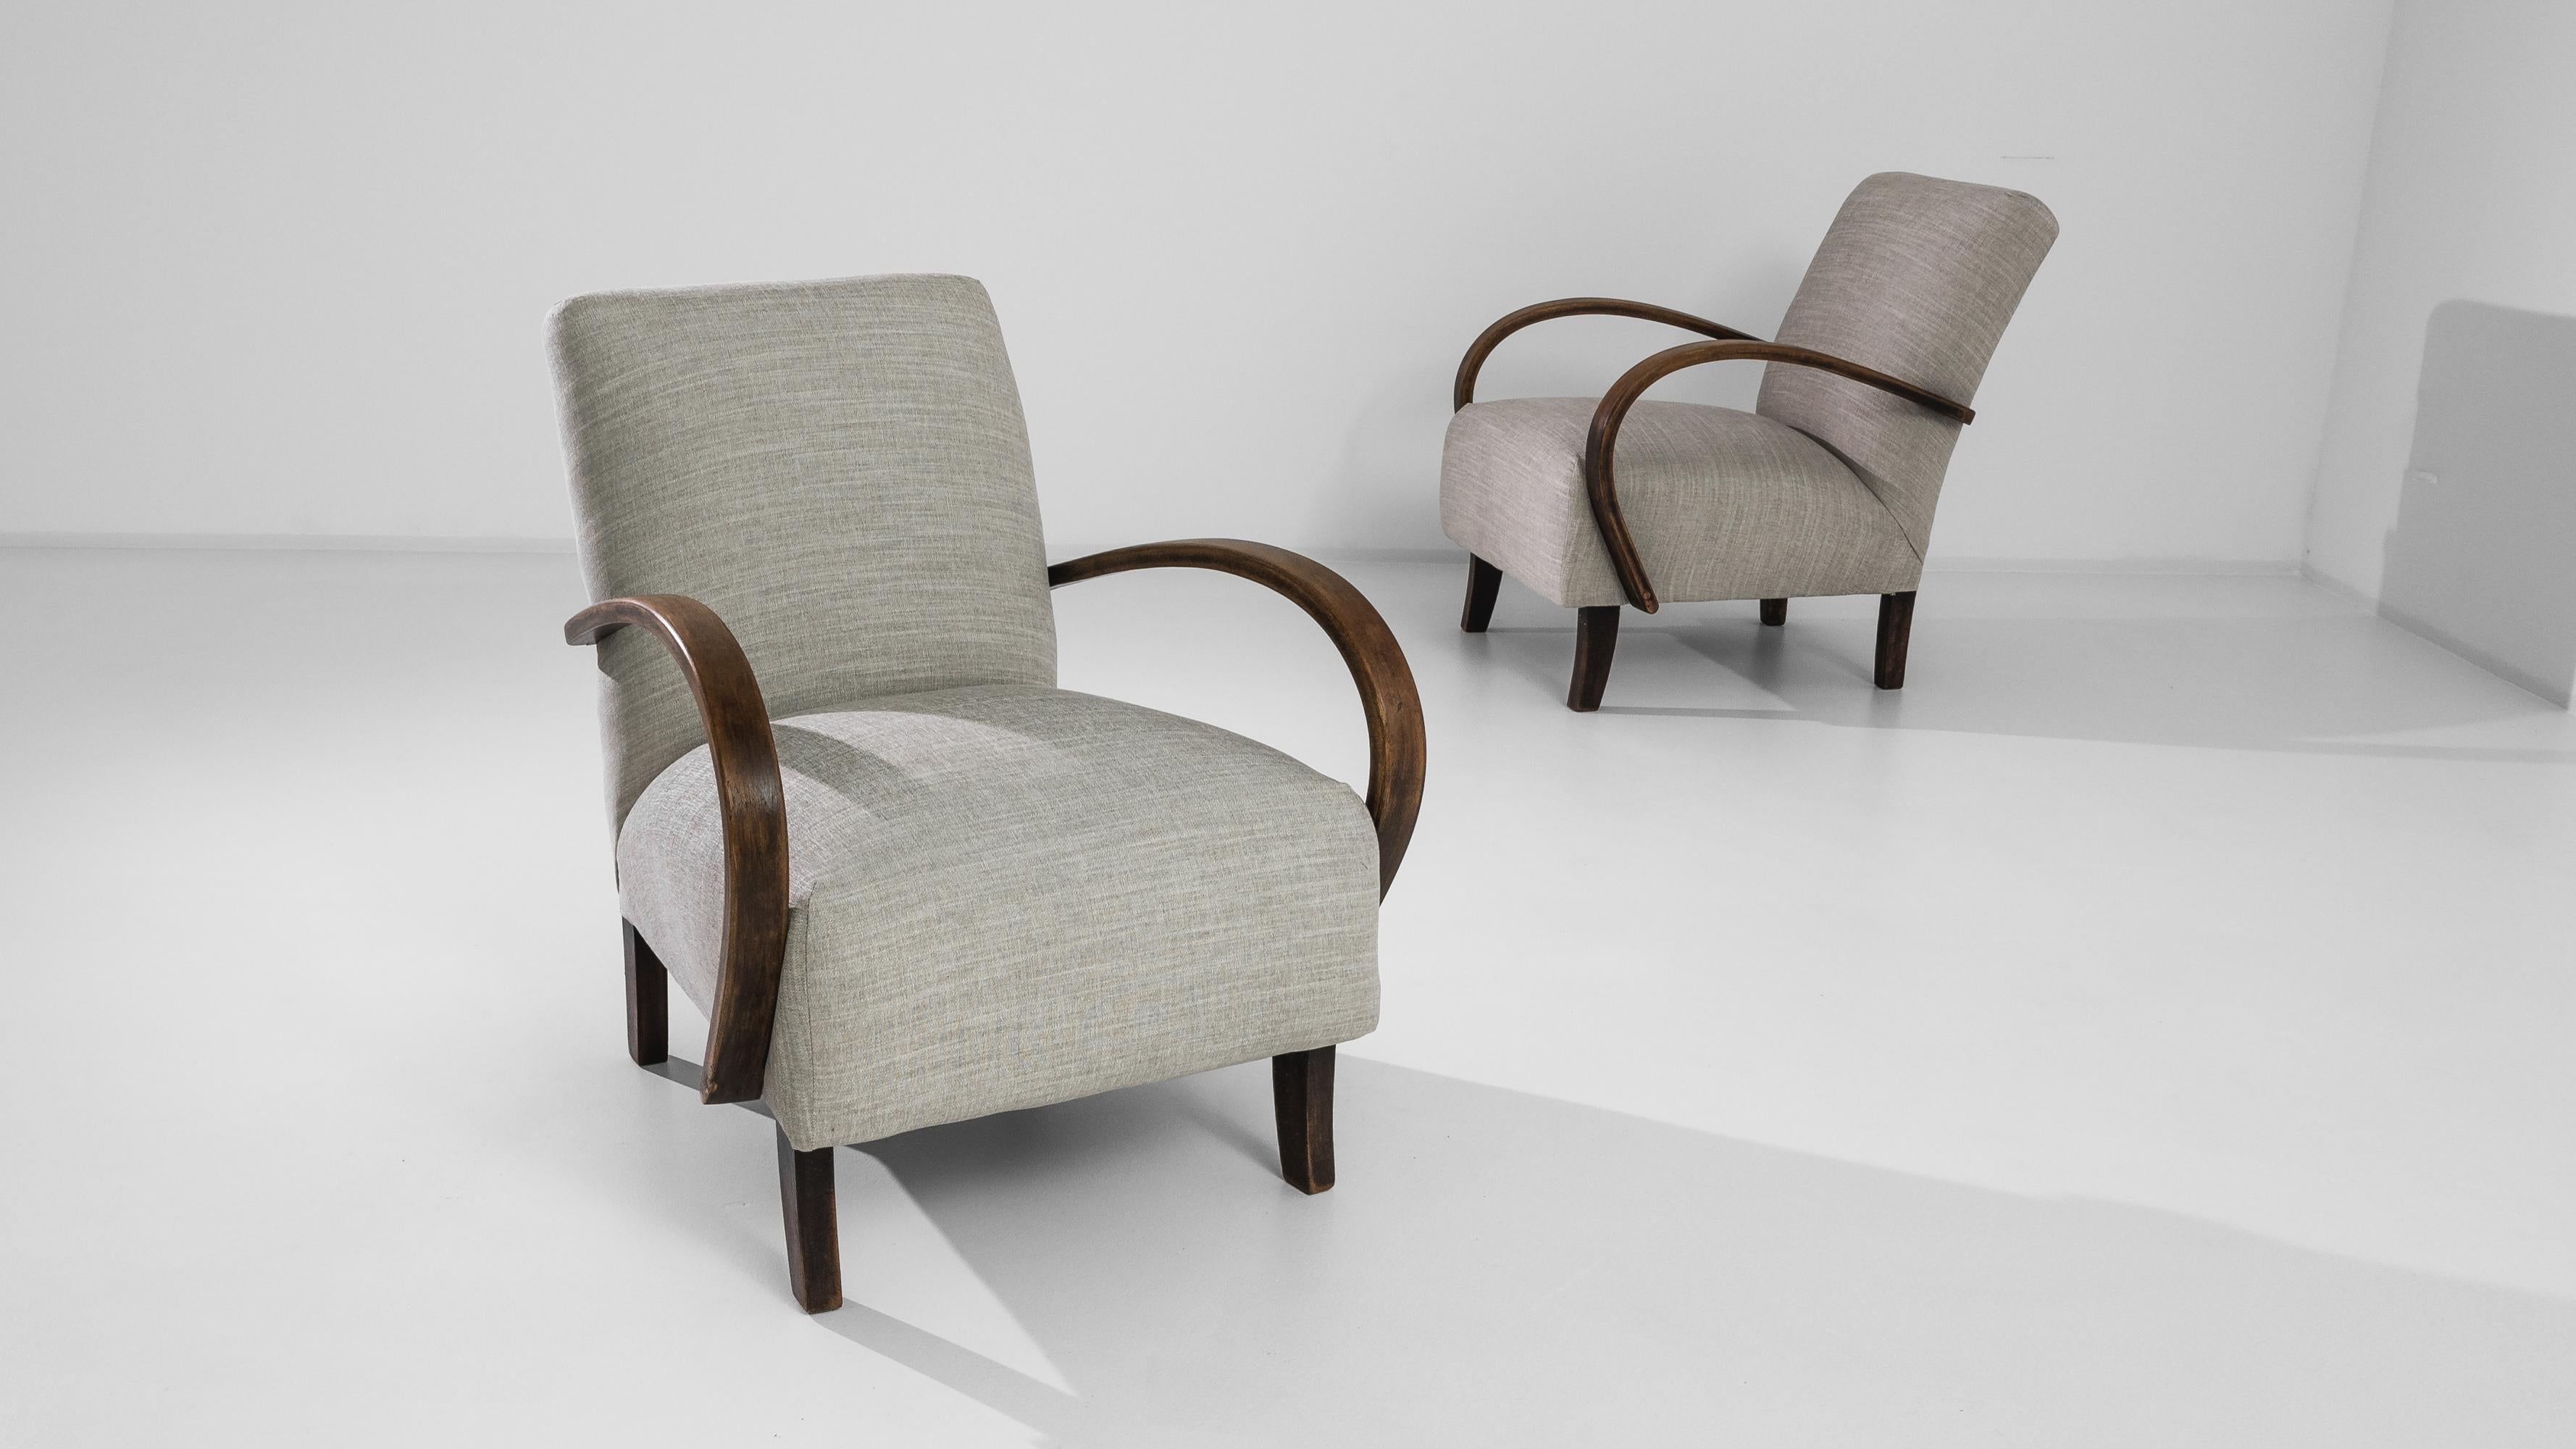 A pair of armchairs by Czech furniture designer J. Halabala. Made in the 1950s, distinctive bentwood furniture designs were produced in Central European furniture factories throughout the mid-20th Century. The eye-catching silhouette and comfortable